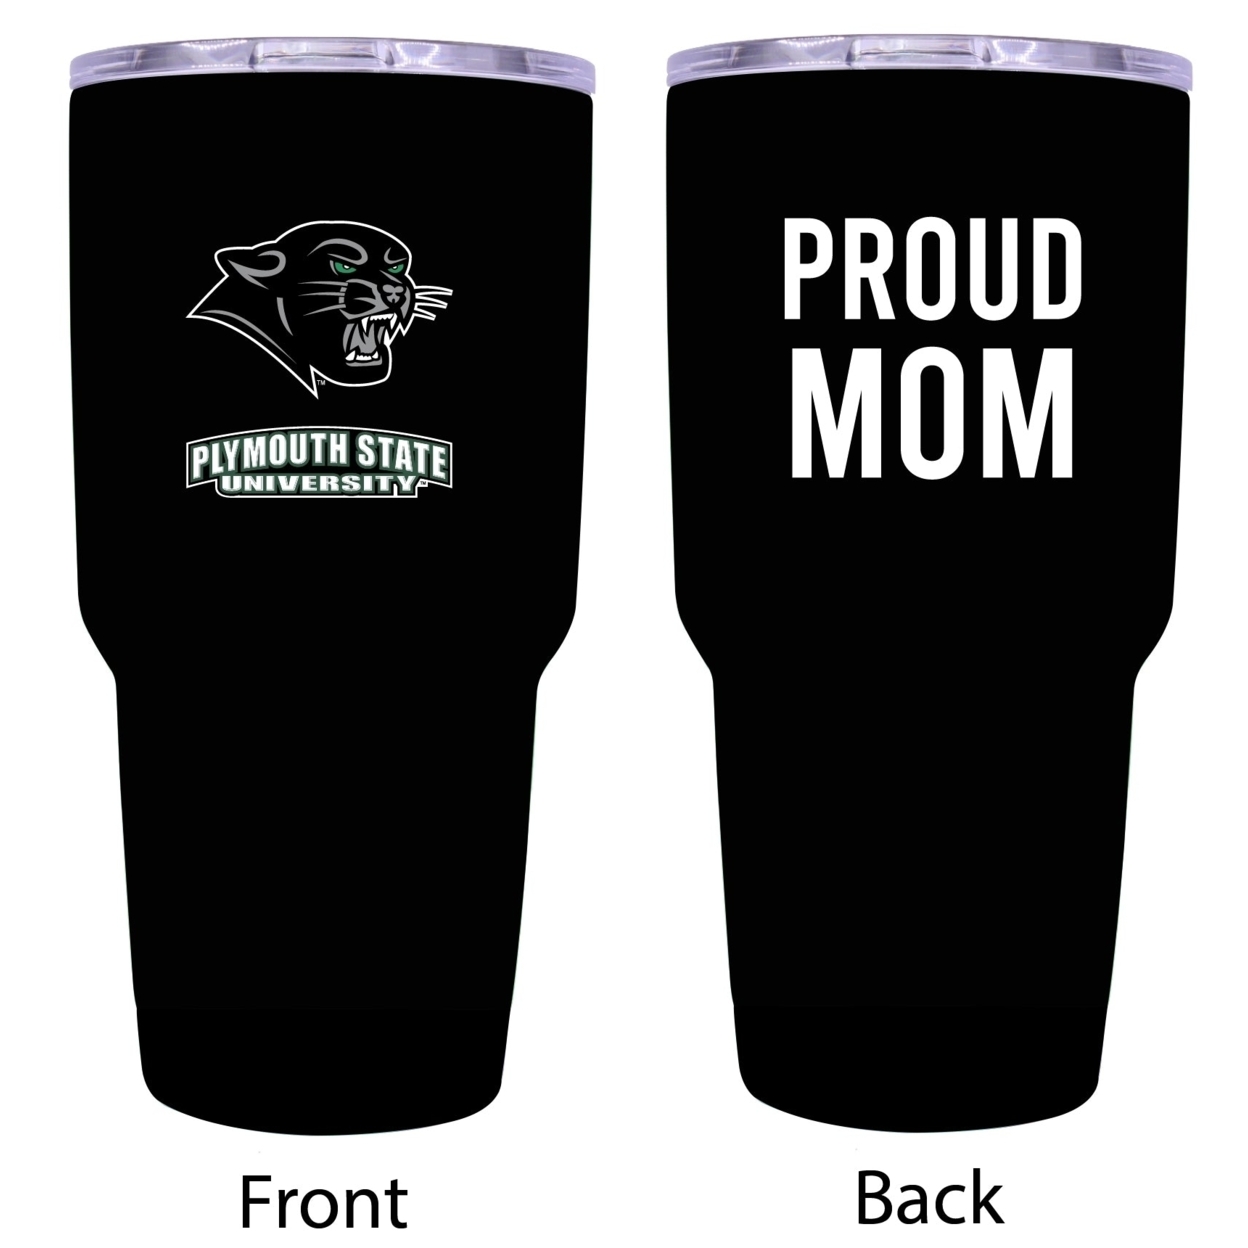 R And R Imports Plymouth State University Proud Mom 24 Oz Insulated Stainless Steel Tumblers Black.